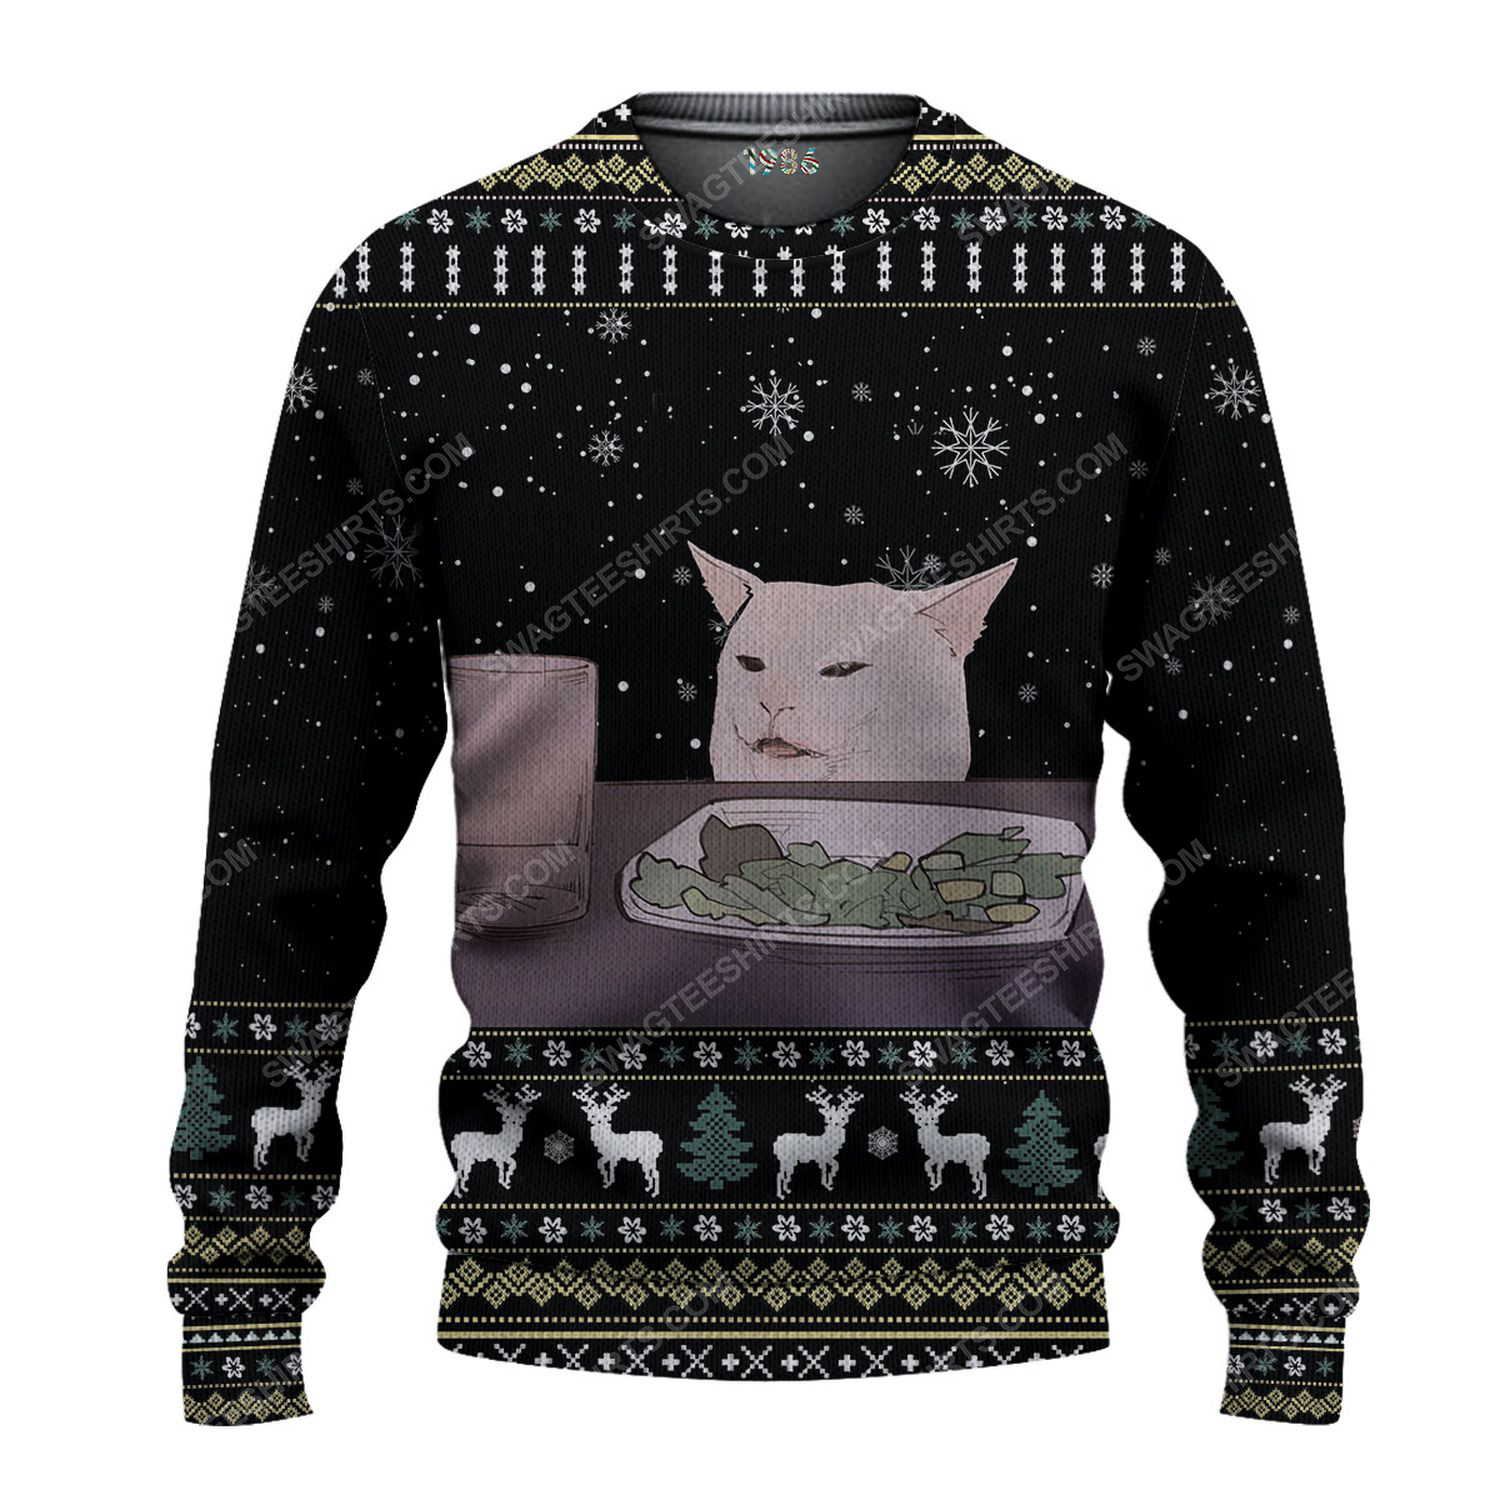 Two women yelling at a cat ugly christmas sweater 1 - Copy (3)